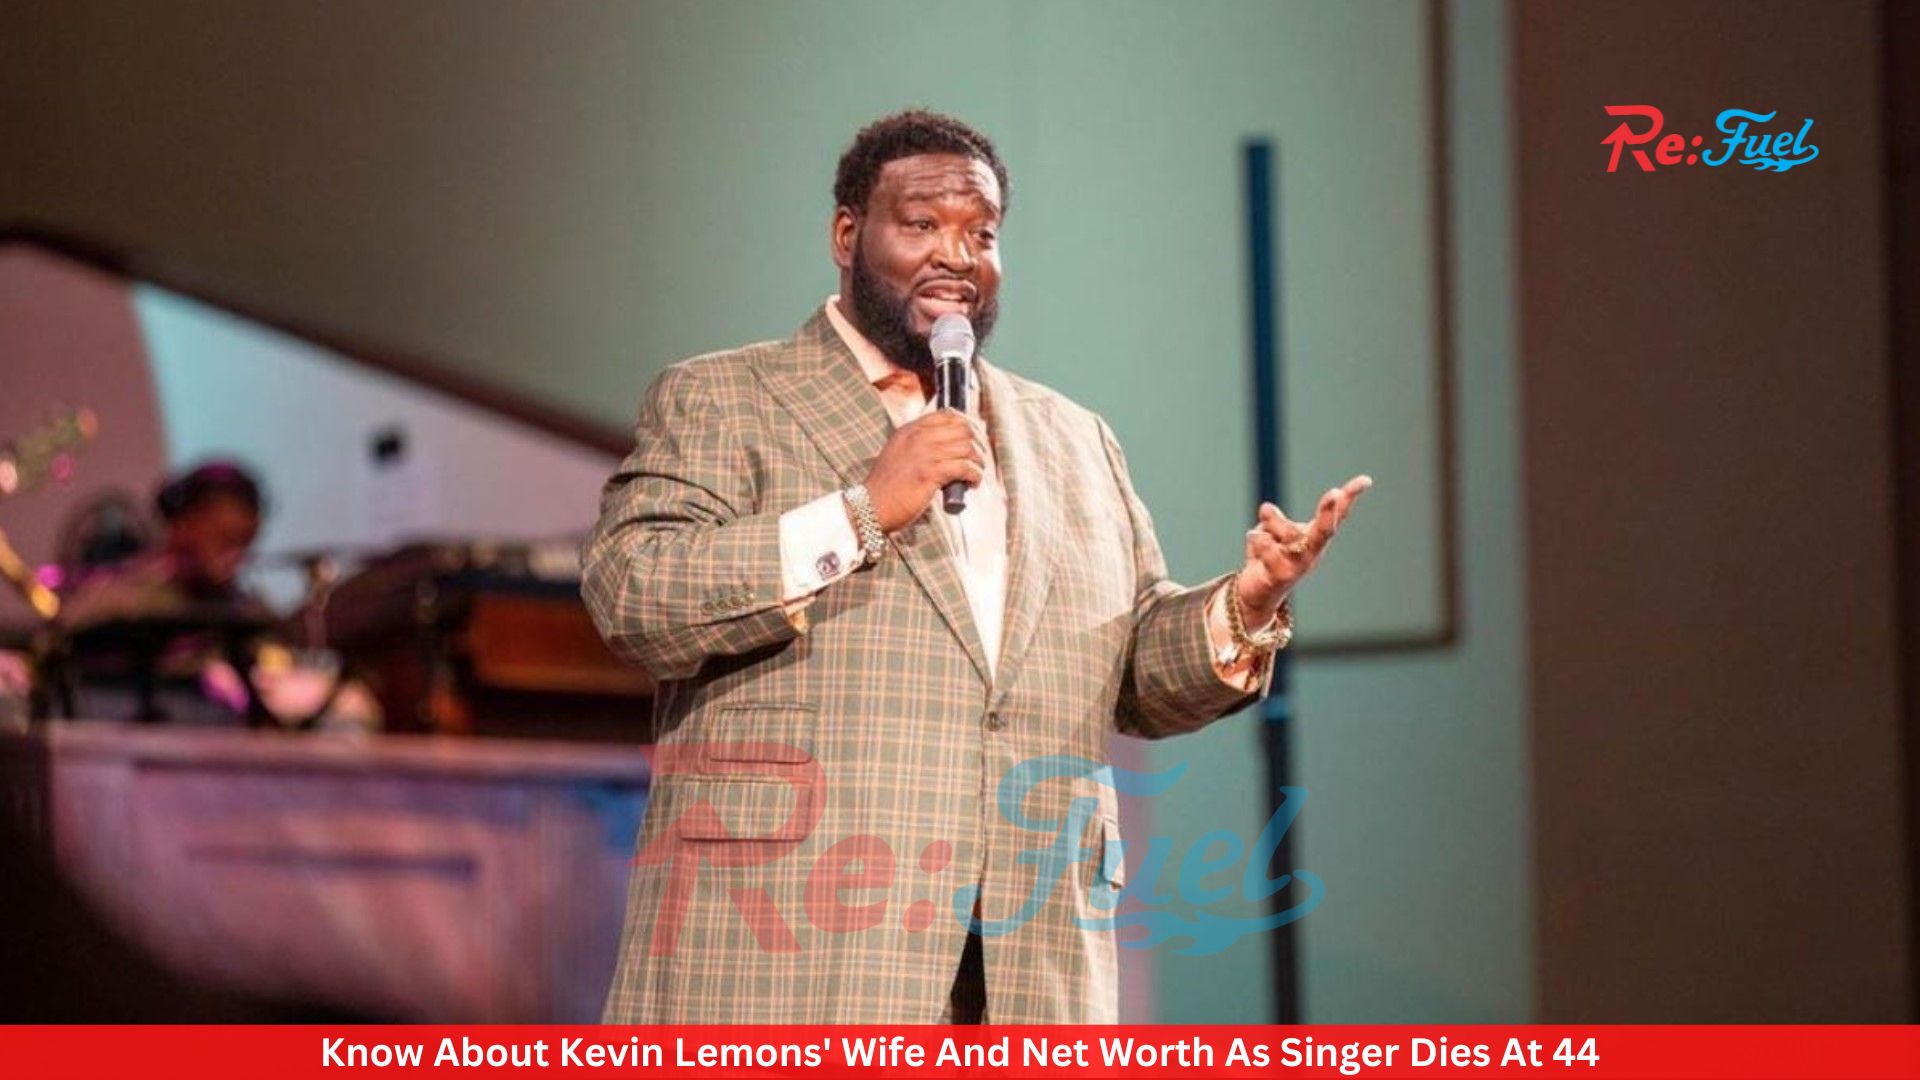 Know About Kevin Lemons' Wife And Net Worth As Singer Dies At 44